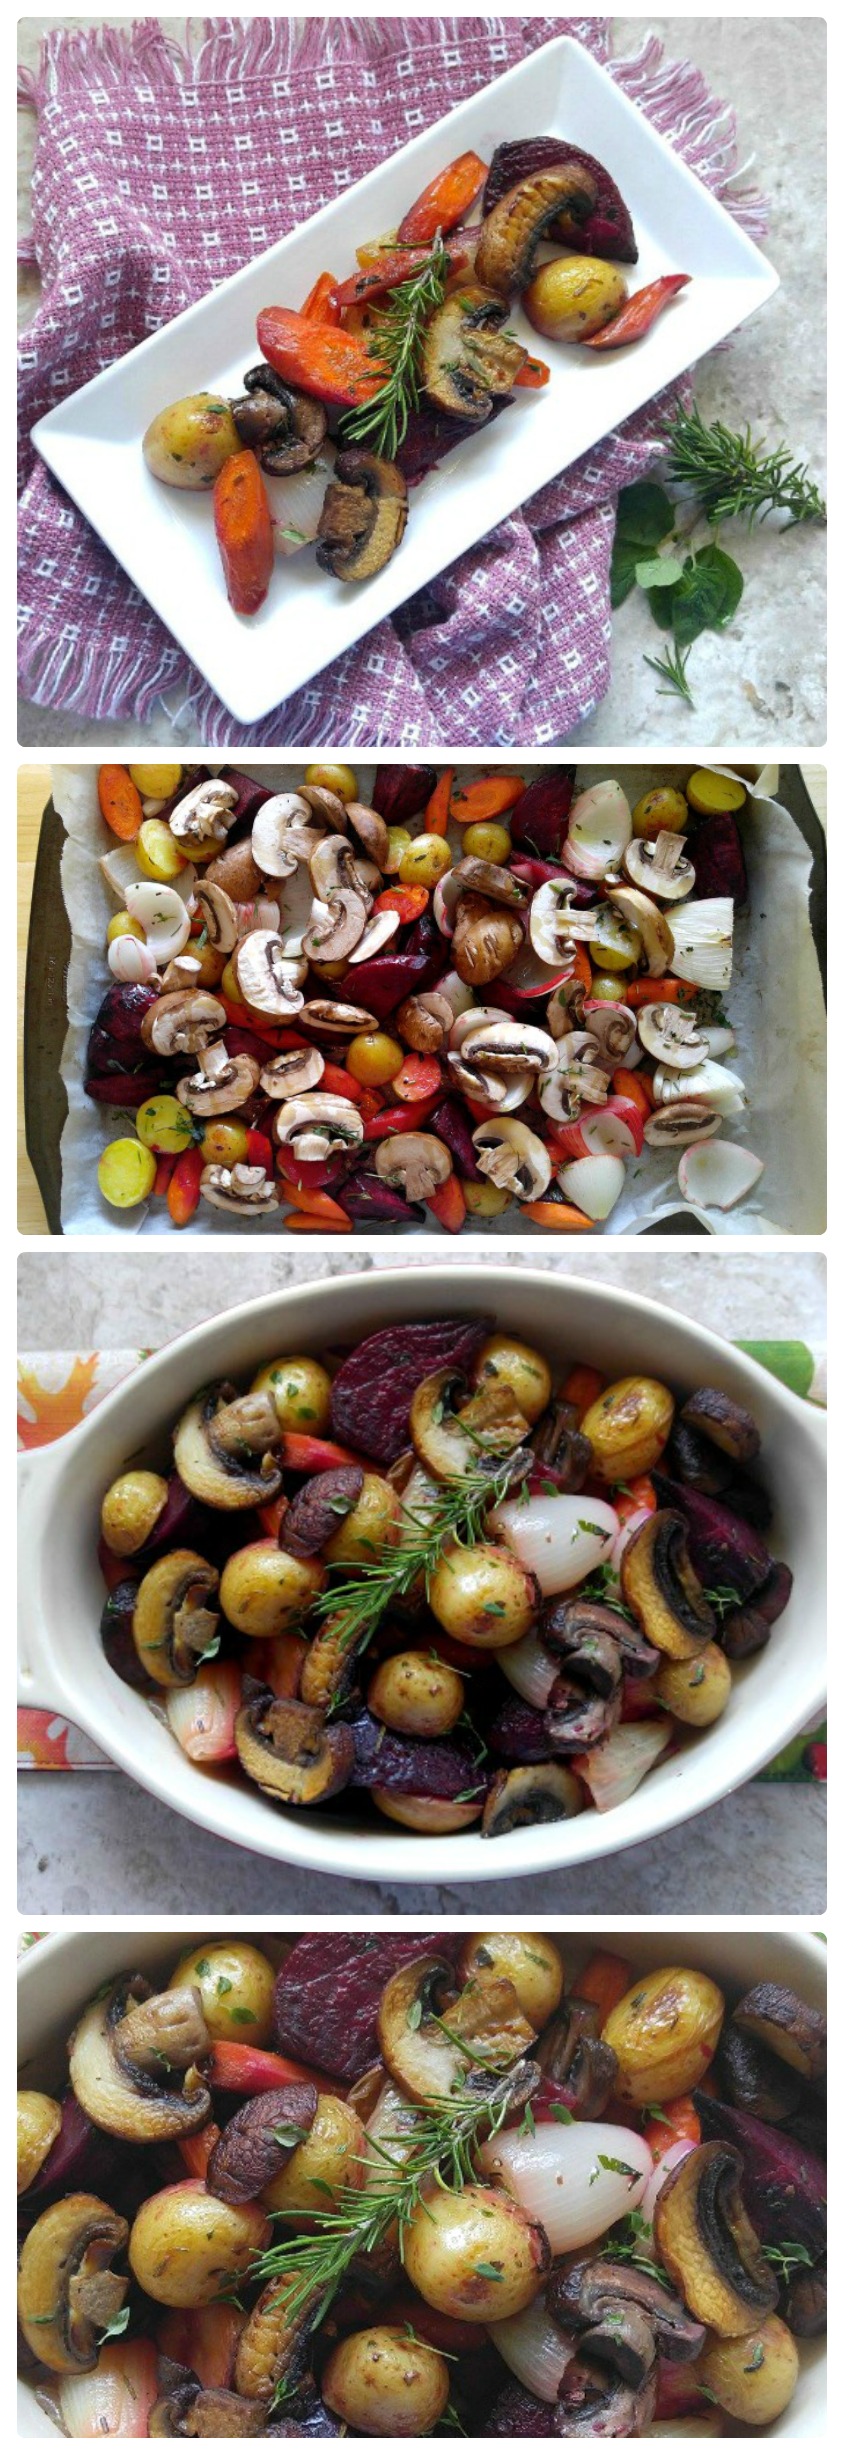 This Roasted root vegetable medley is a perfect fall side dish. Why not serve it for Thanskgiving?